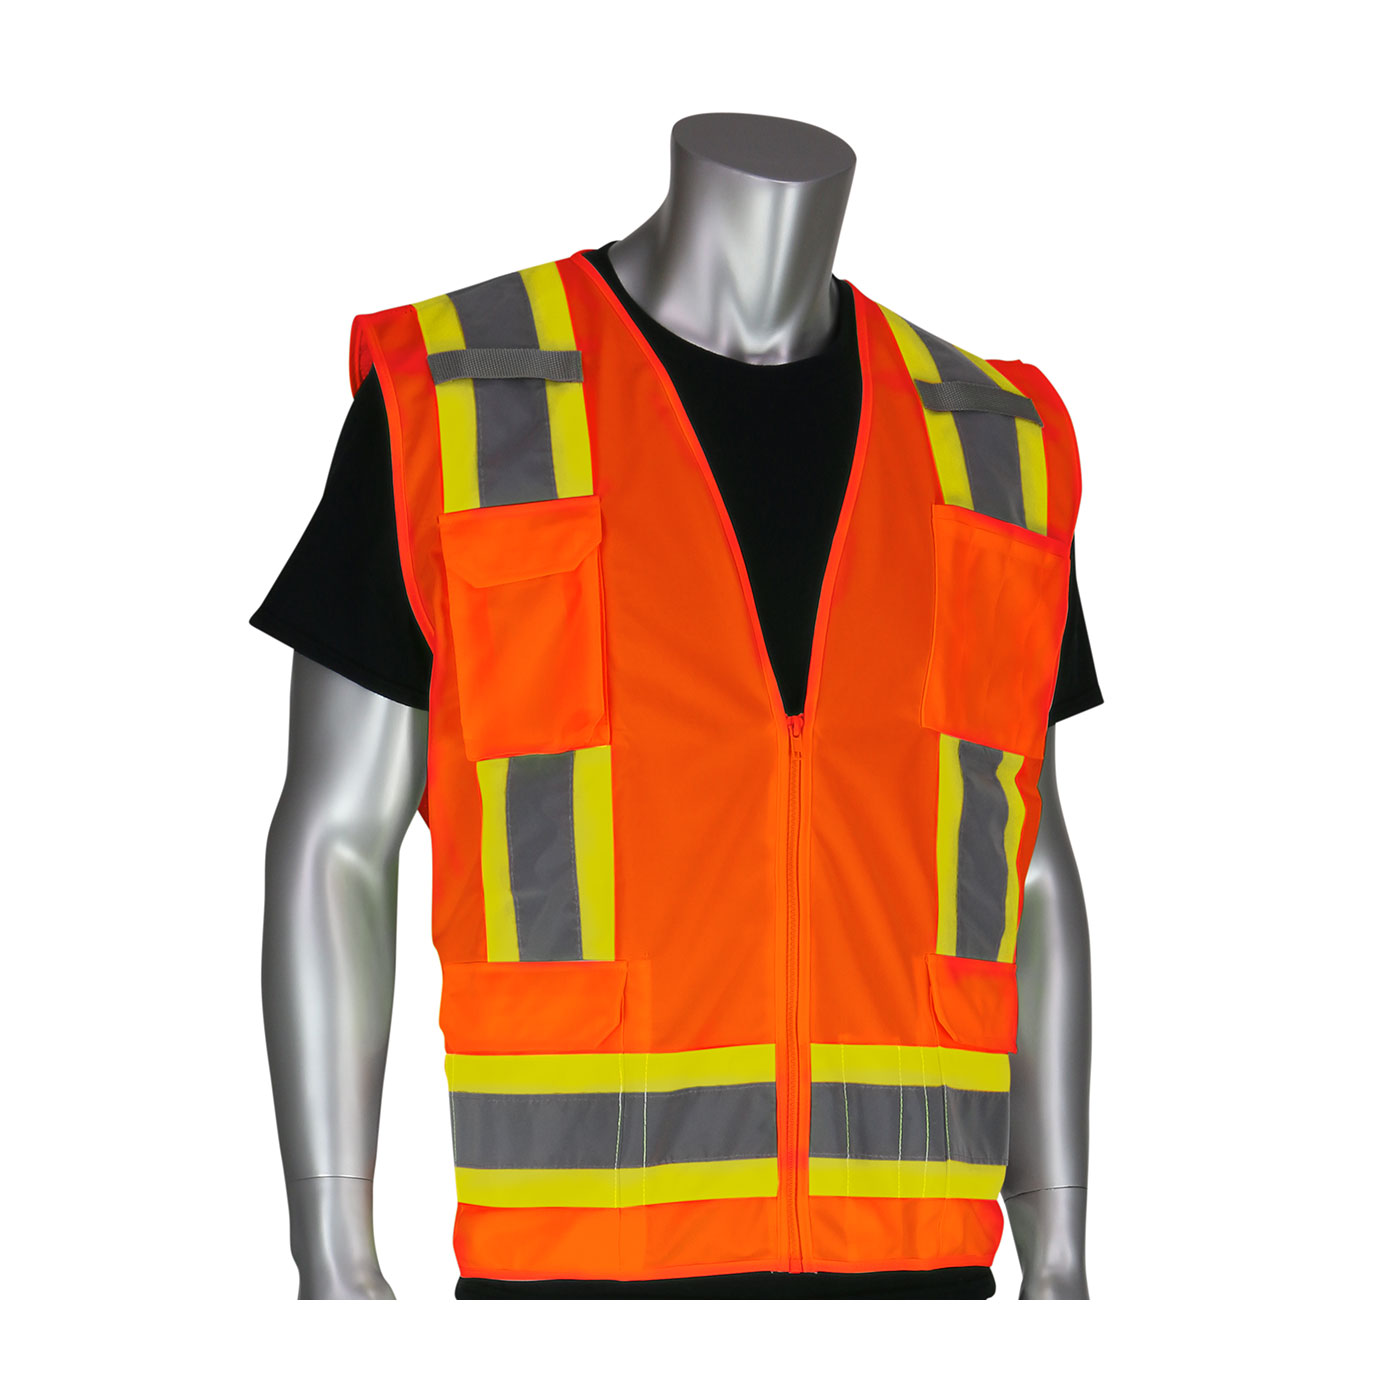 PIP® ANSI Type R Class 2 Two-Tone Eleven Pocket Surveyors Mesh Vest #302-0500M-OR